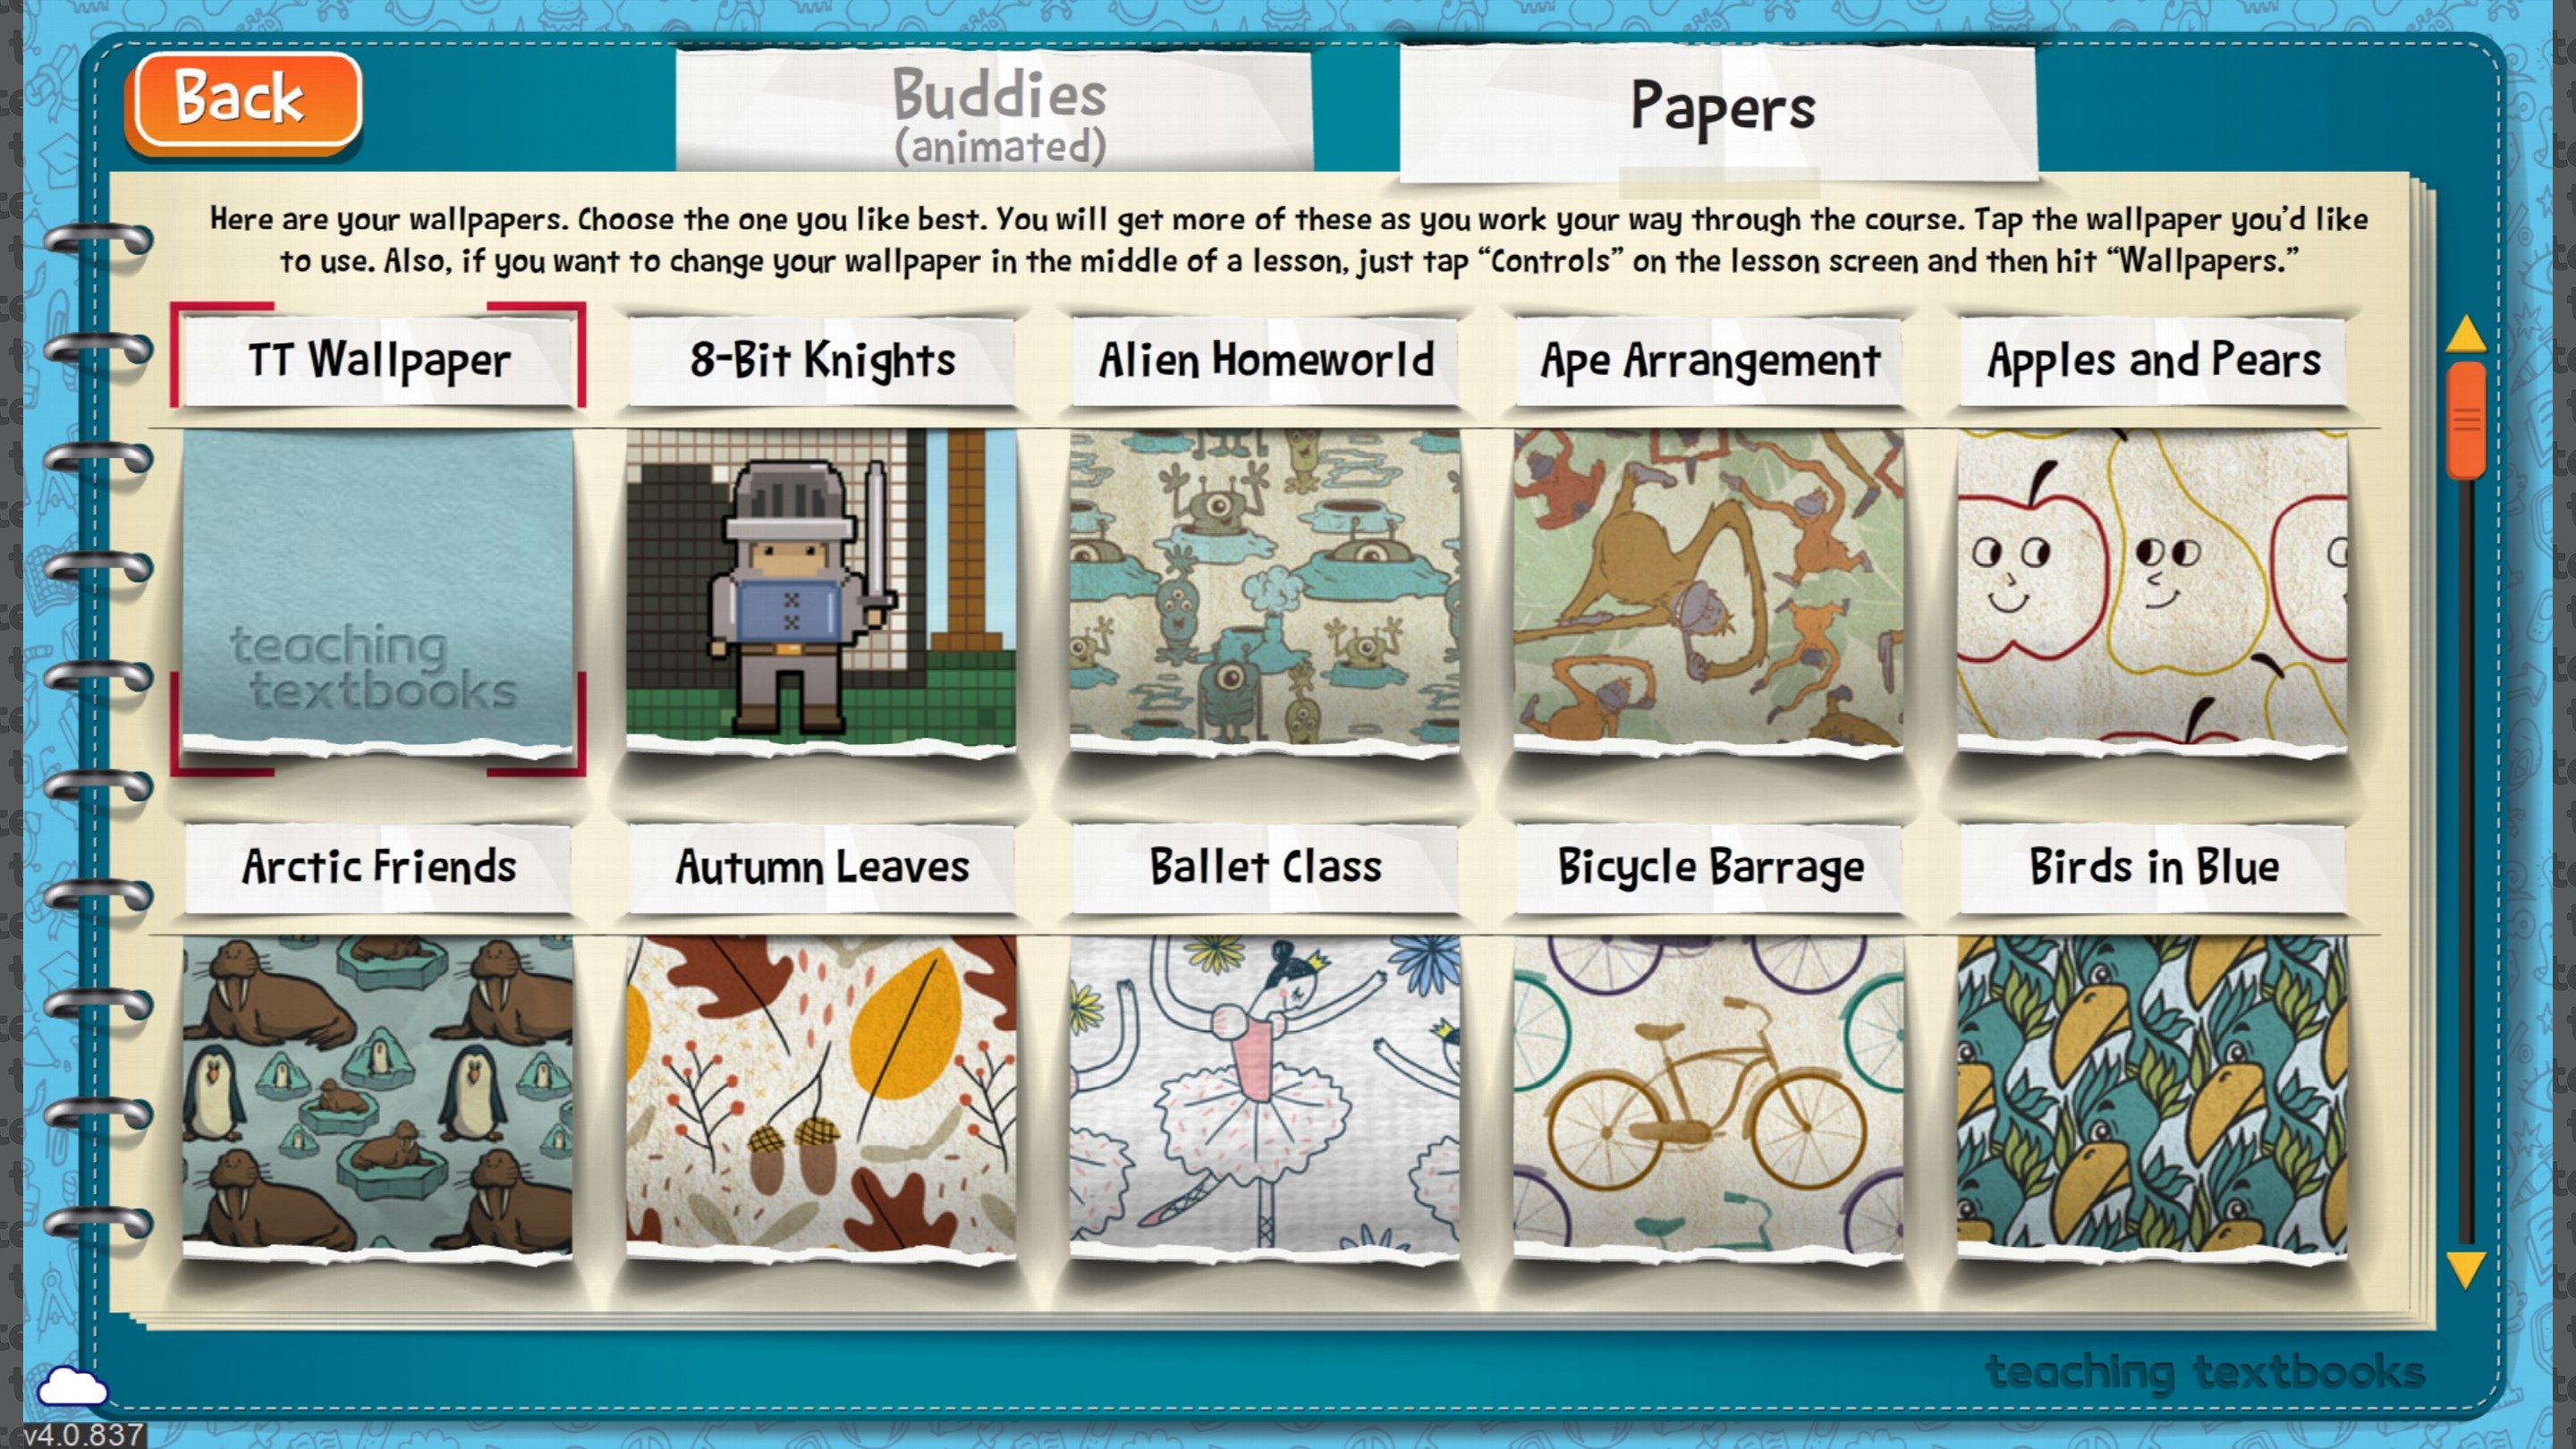 The student can customize how the app looks, with a wide selection of beautiful wallpapers, and fun virtual “Buddies.”